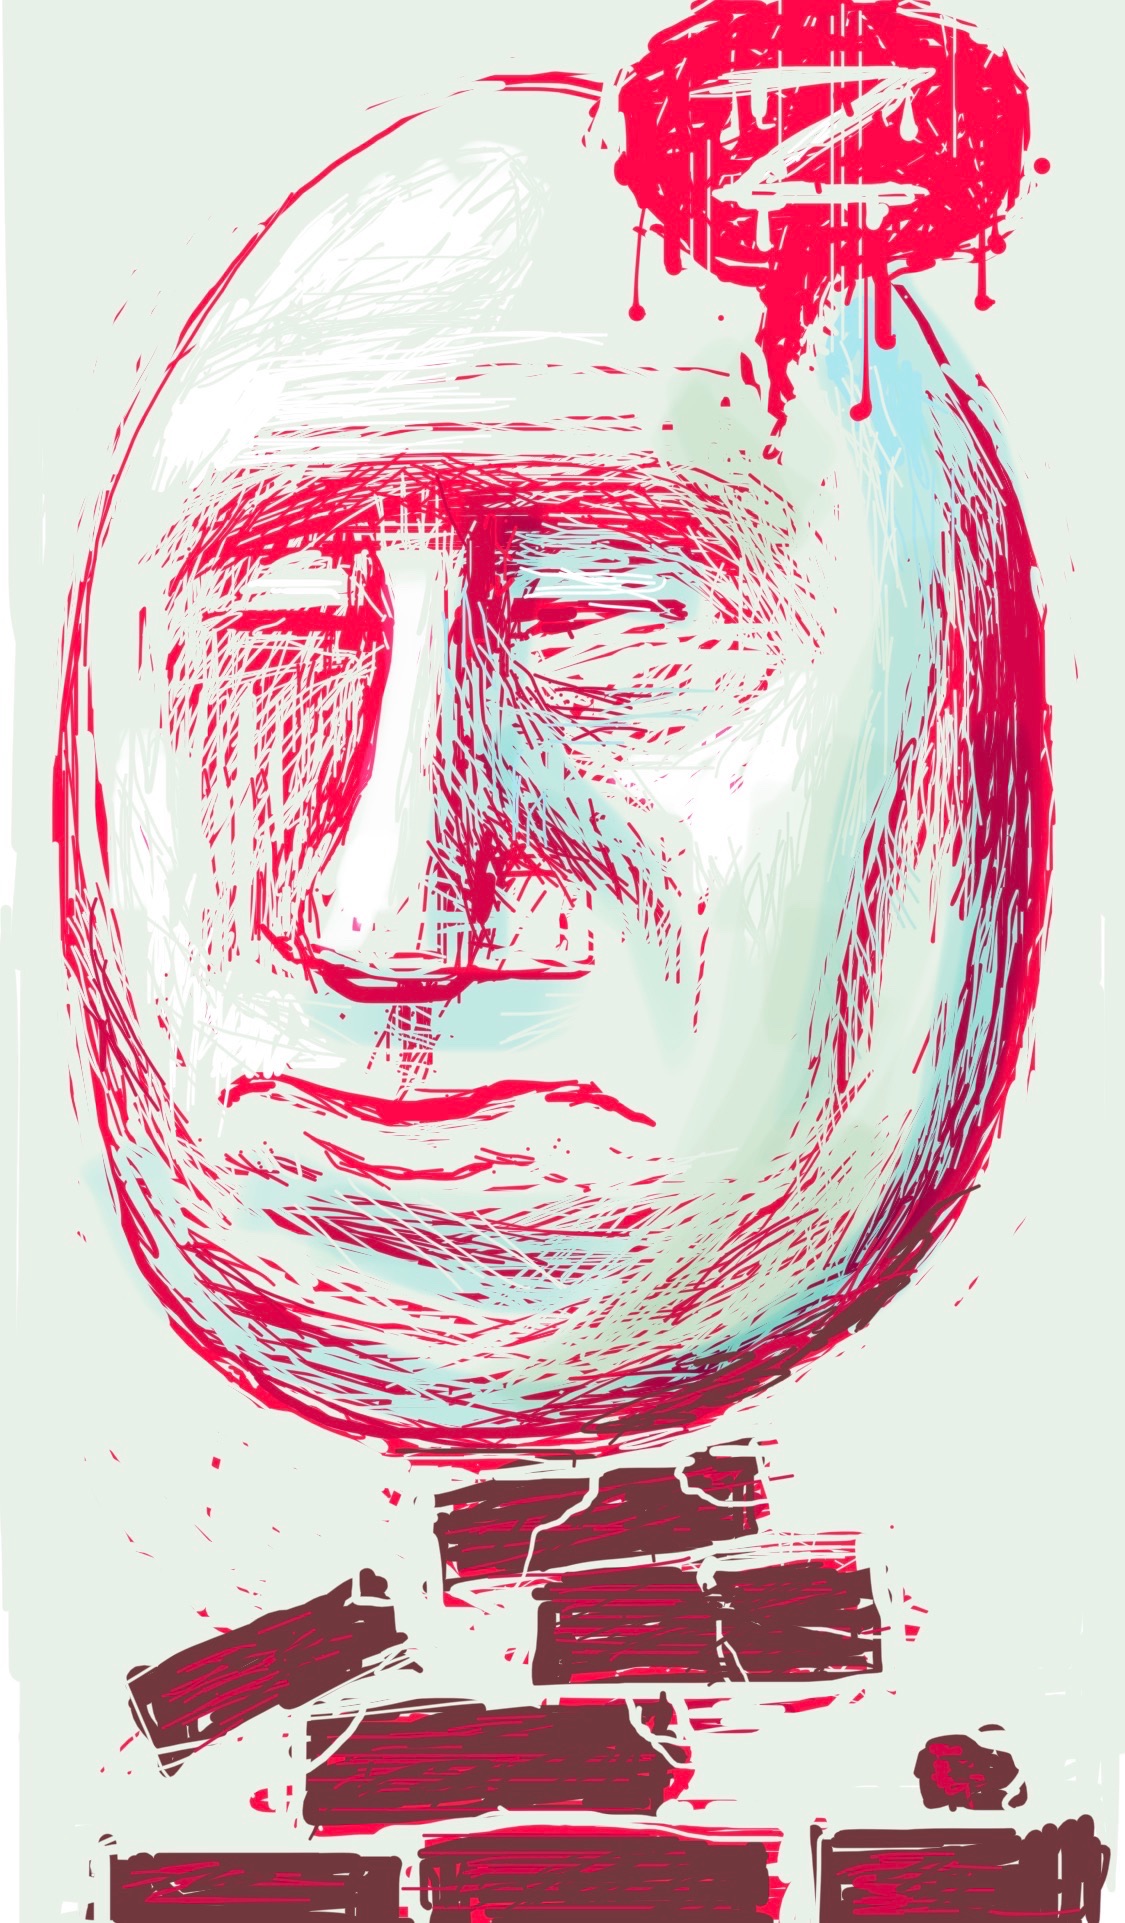 A sketch of Vladimir Putin as Humpty Dumpty, asleep and perched on a pile of crumbling bricks